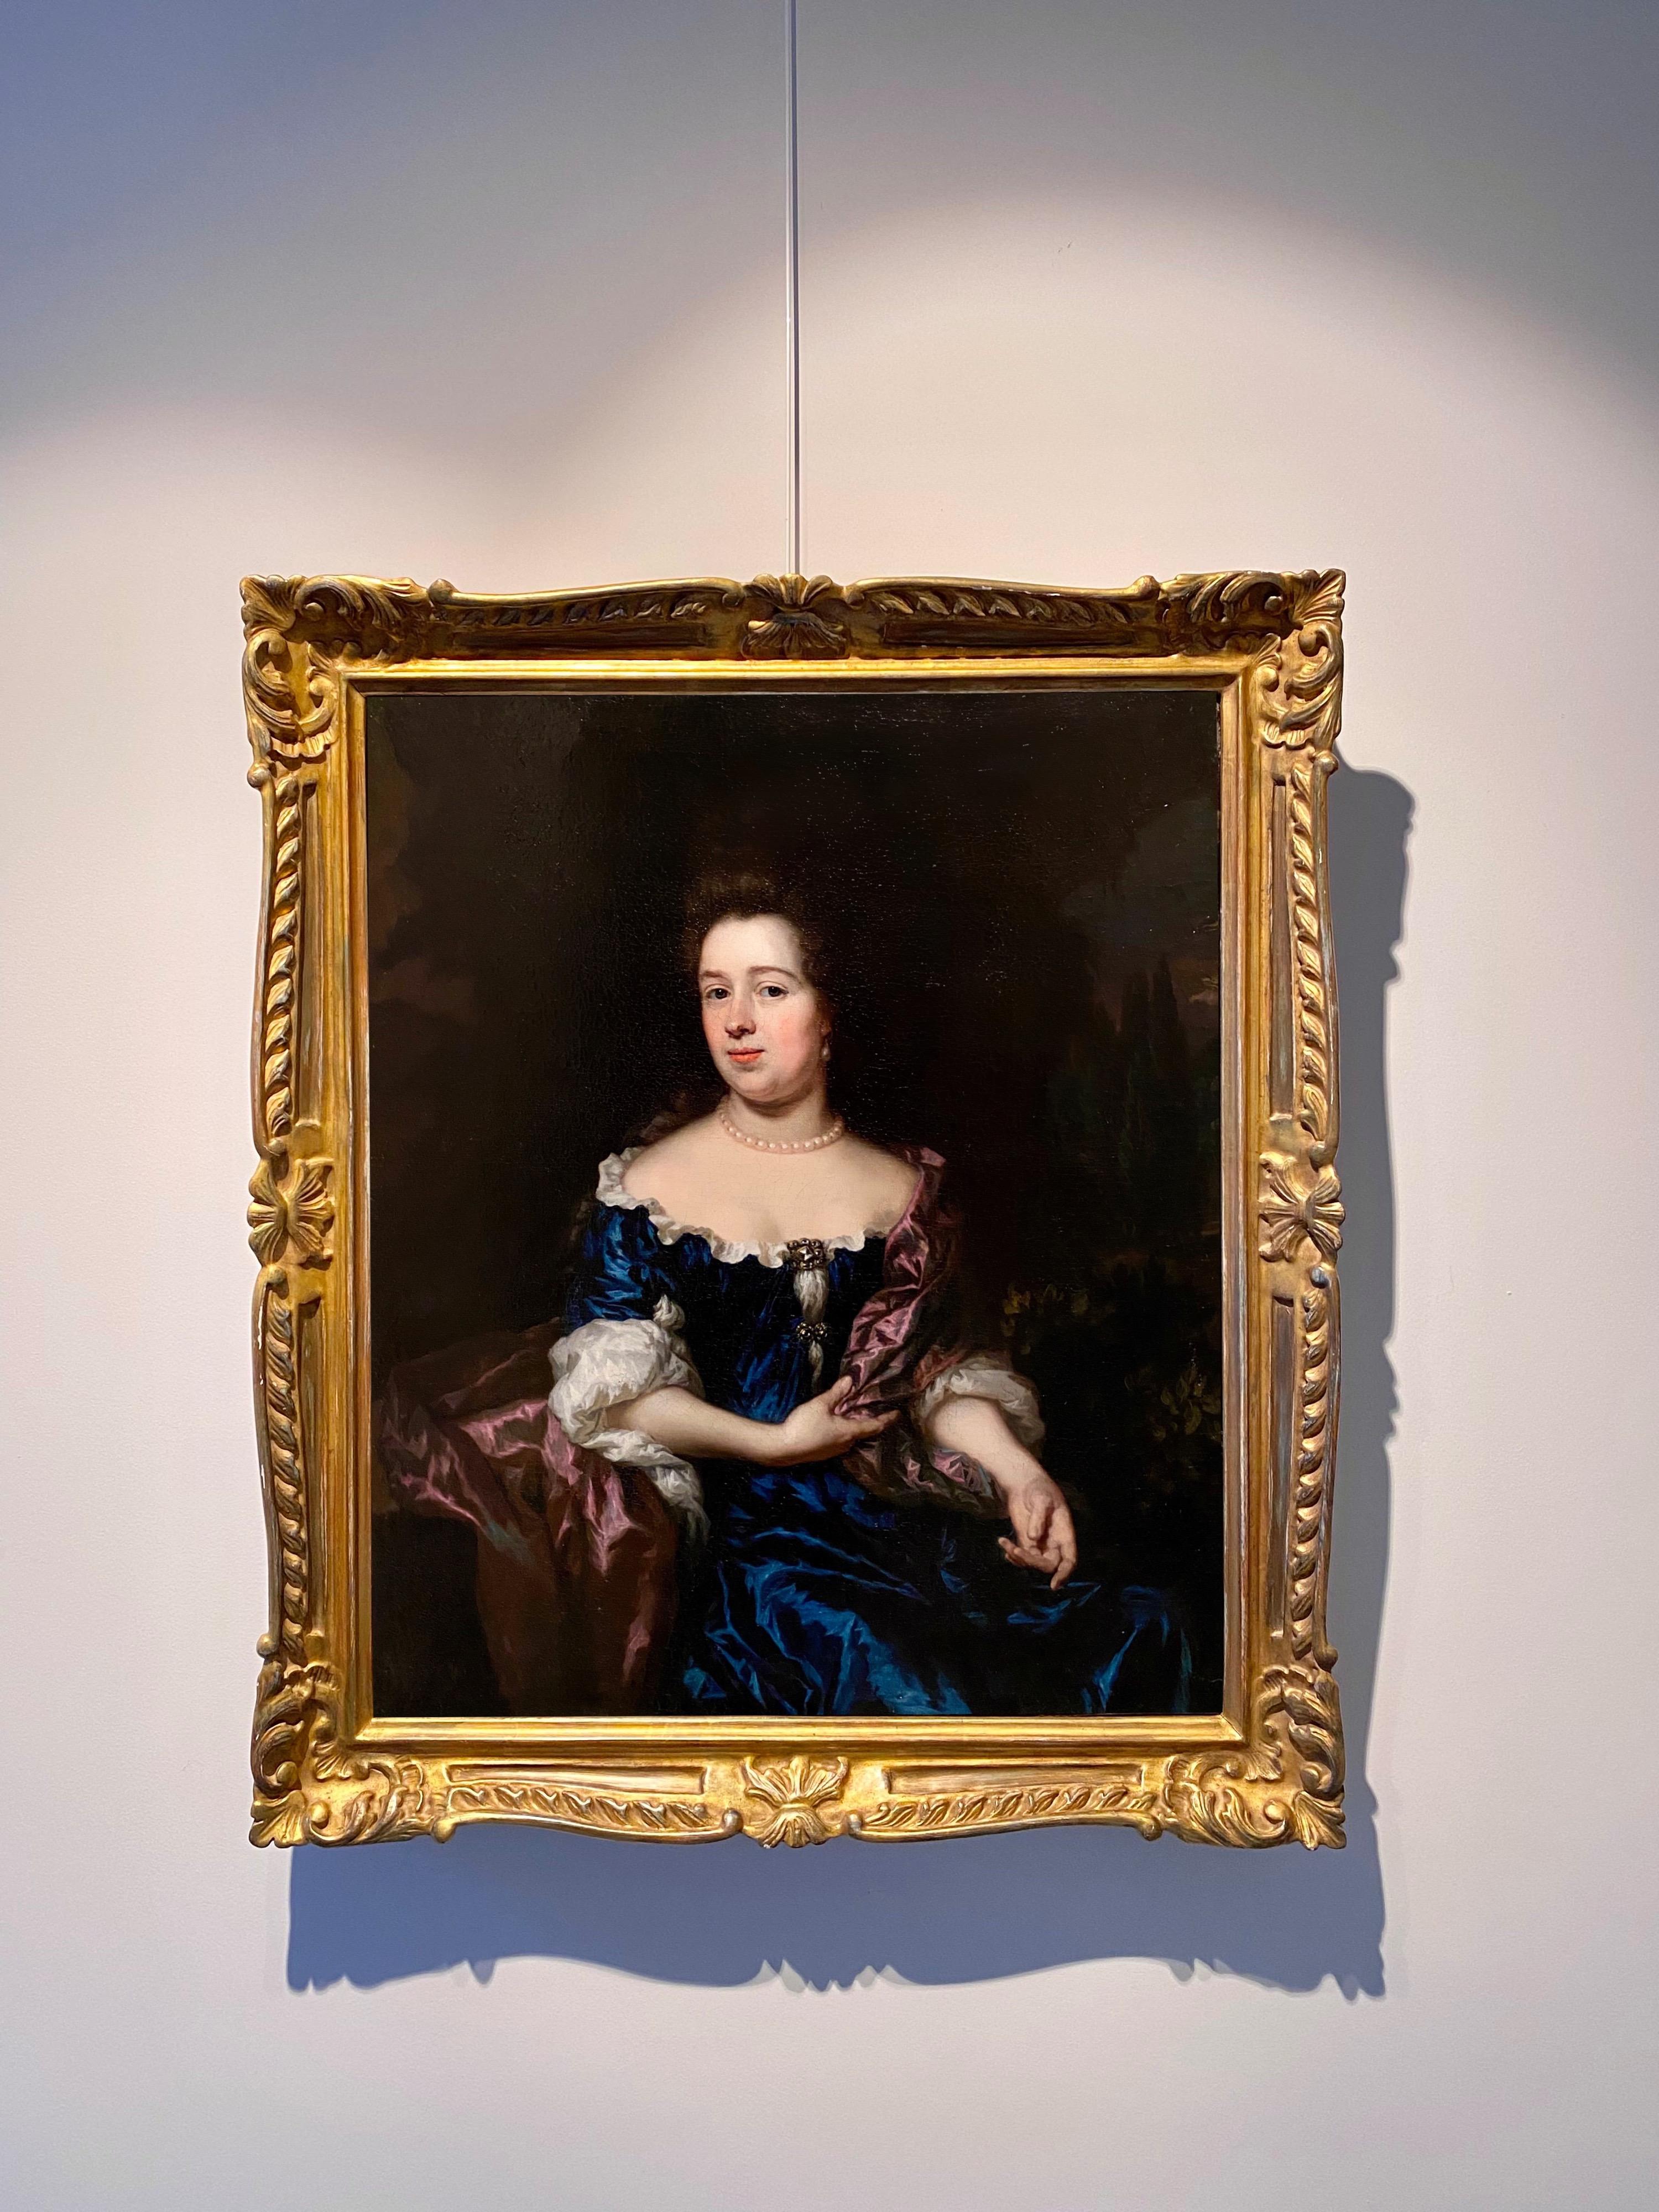 17th century Dutch old master portrait of a noble lady ca. 1680 - Painting by Nicolaes Maes